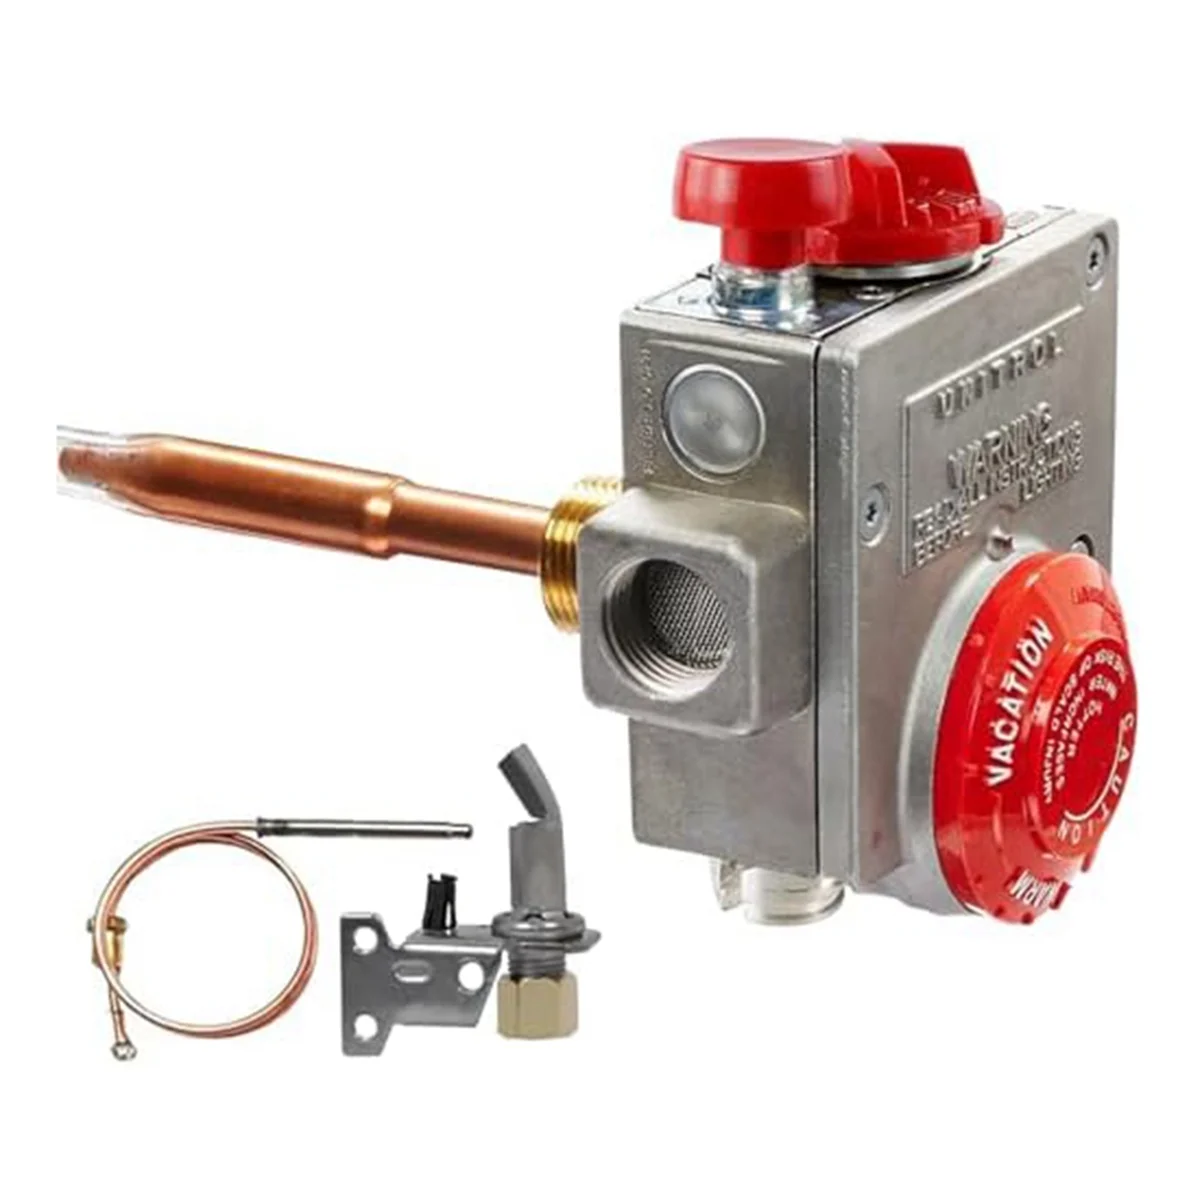 

110-326 for Robertshaw Water Heater Thermostat, Natural Gas Water Heater Valve with 1-3/8 Inch Handle, 3-1/2 Inch Toilet